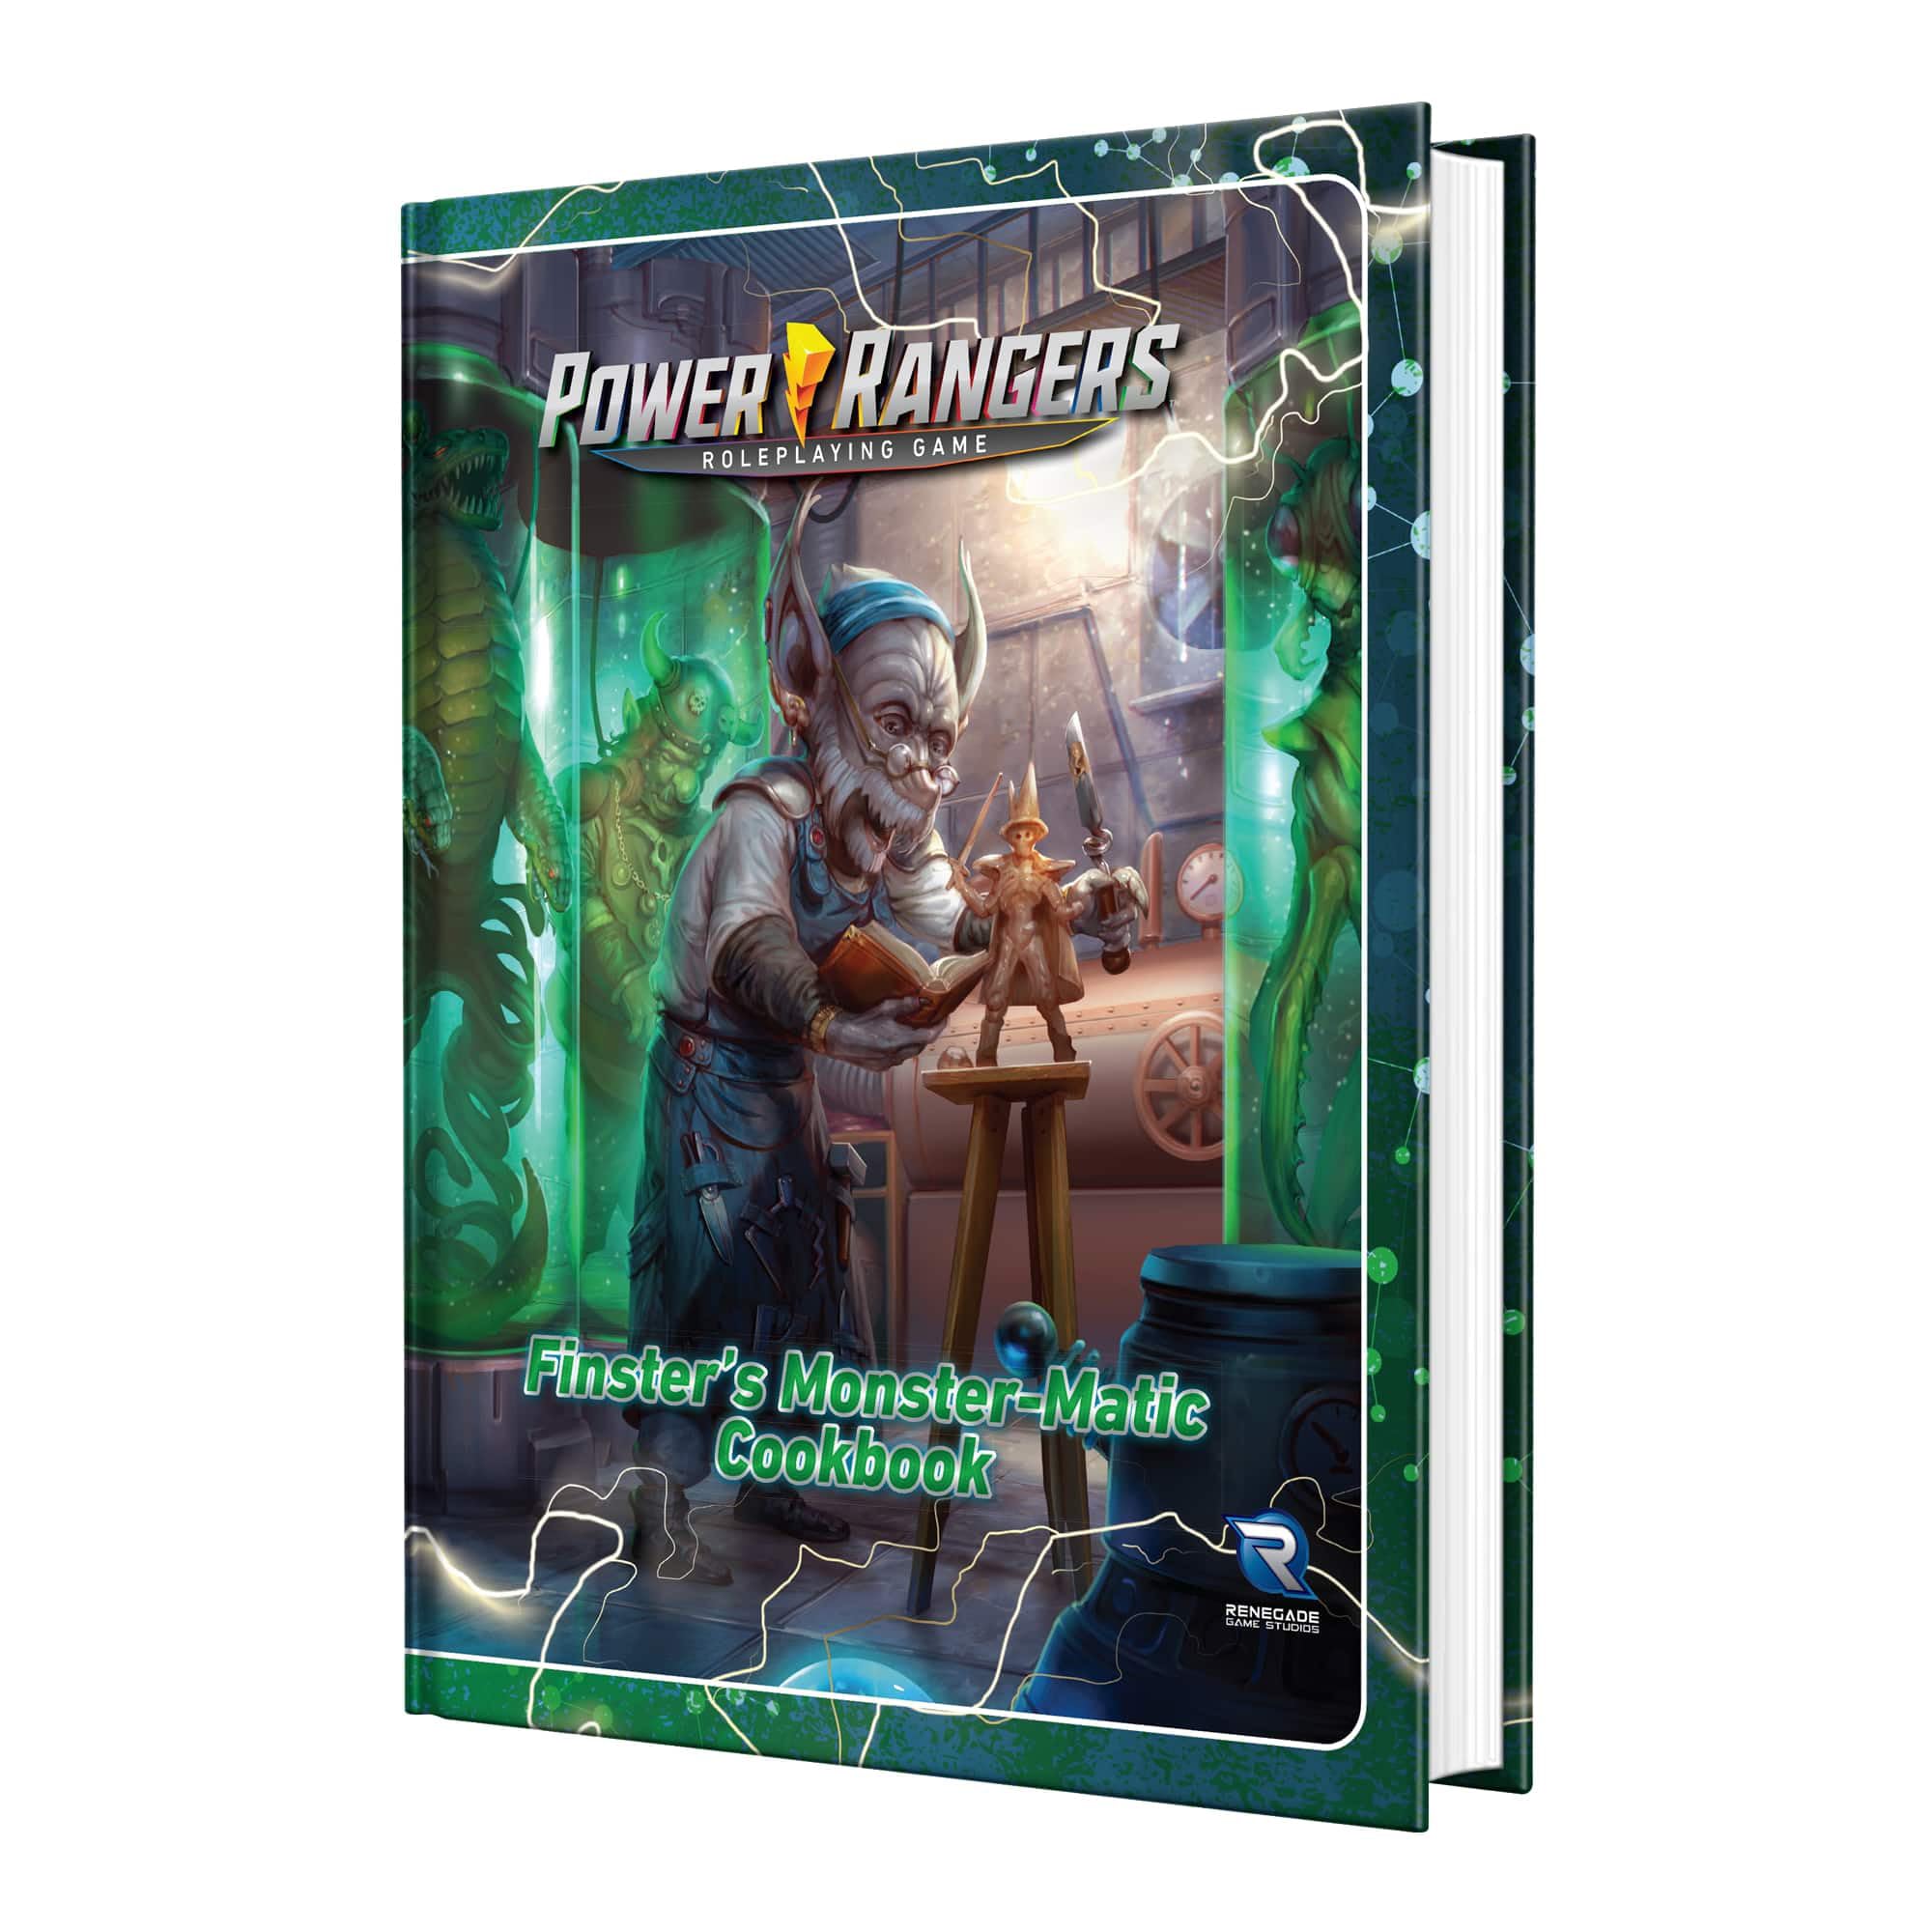 Renegade Game Studios: Power Rangers RPG Finster’s Monster-Matic Cookbook Sourcebook - Hardcover Book, Roleplaying Game, Create 100+ Threats, Ages 14+